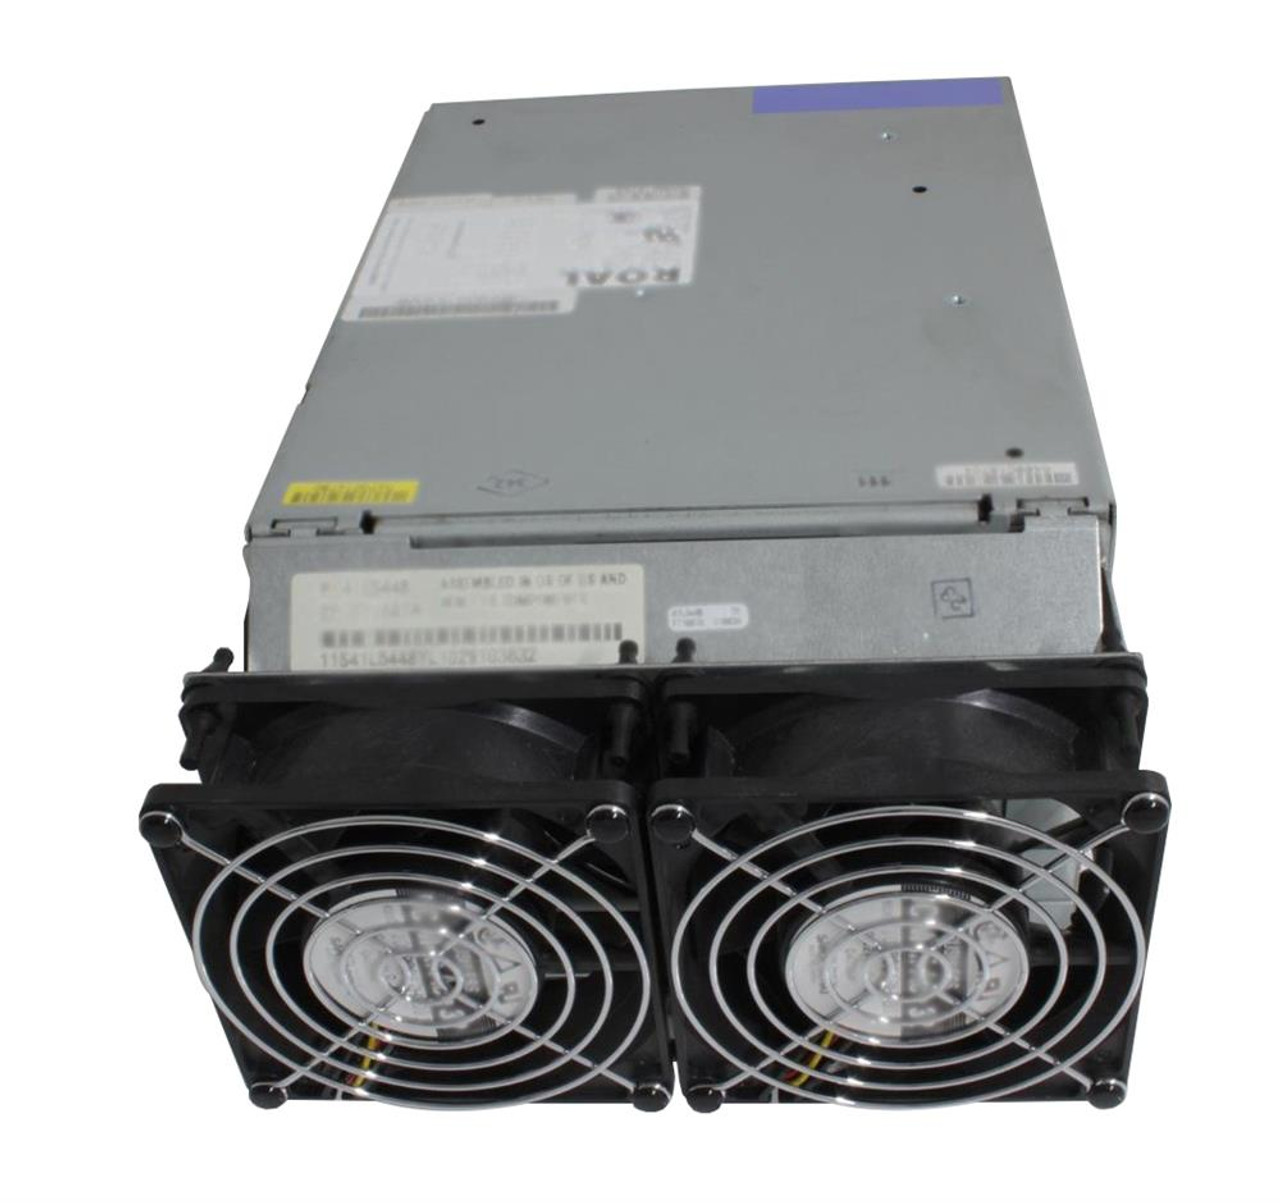 DPS-390AB - IBM 390-Watts Power Supply for RS 6000